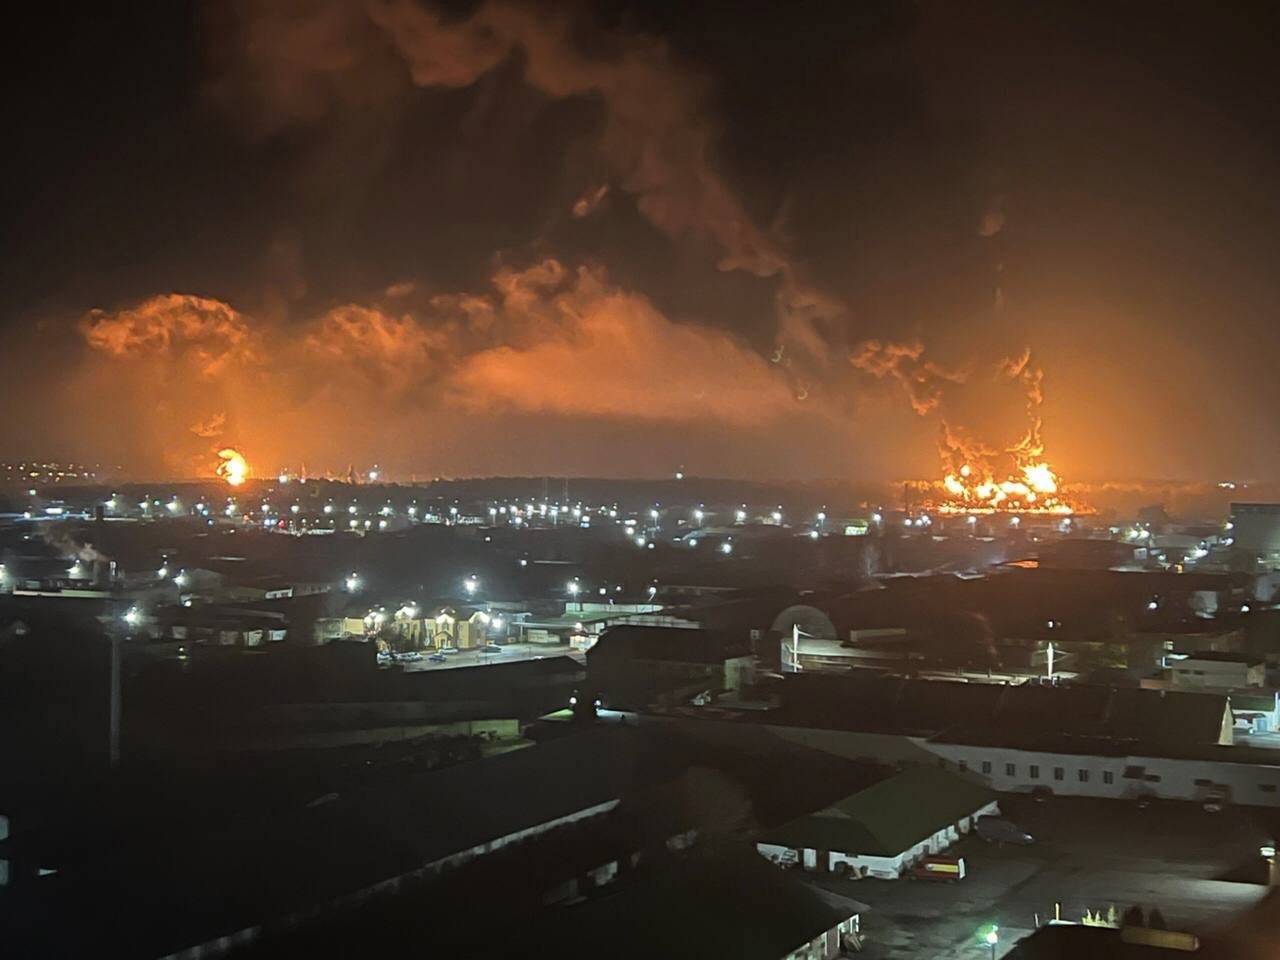 A large fire at an oil depot in Bryansk on Monday, April 25, OSINTtechnical, Defense Express